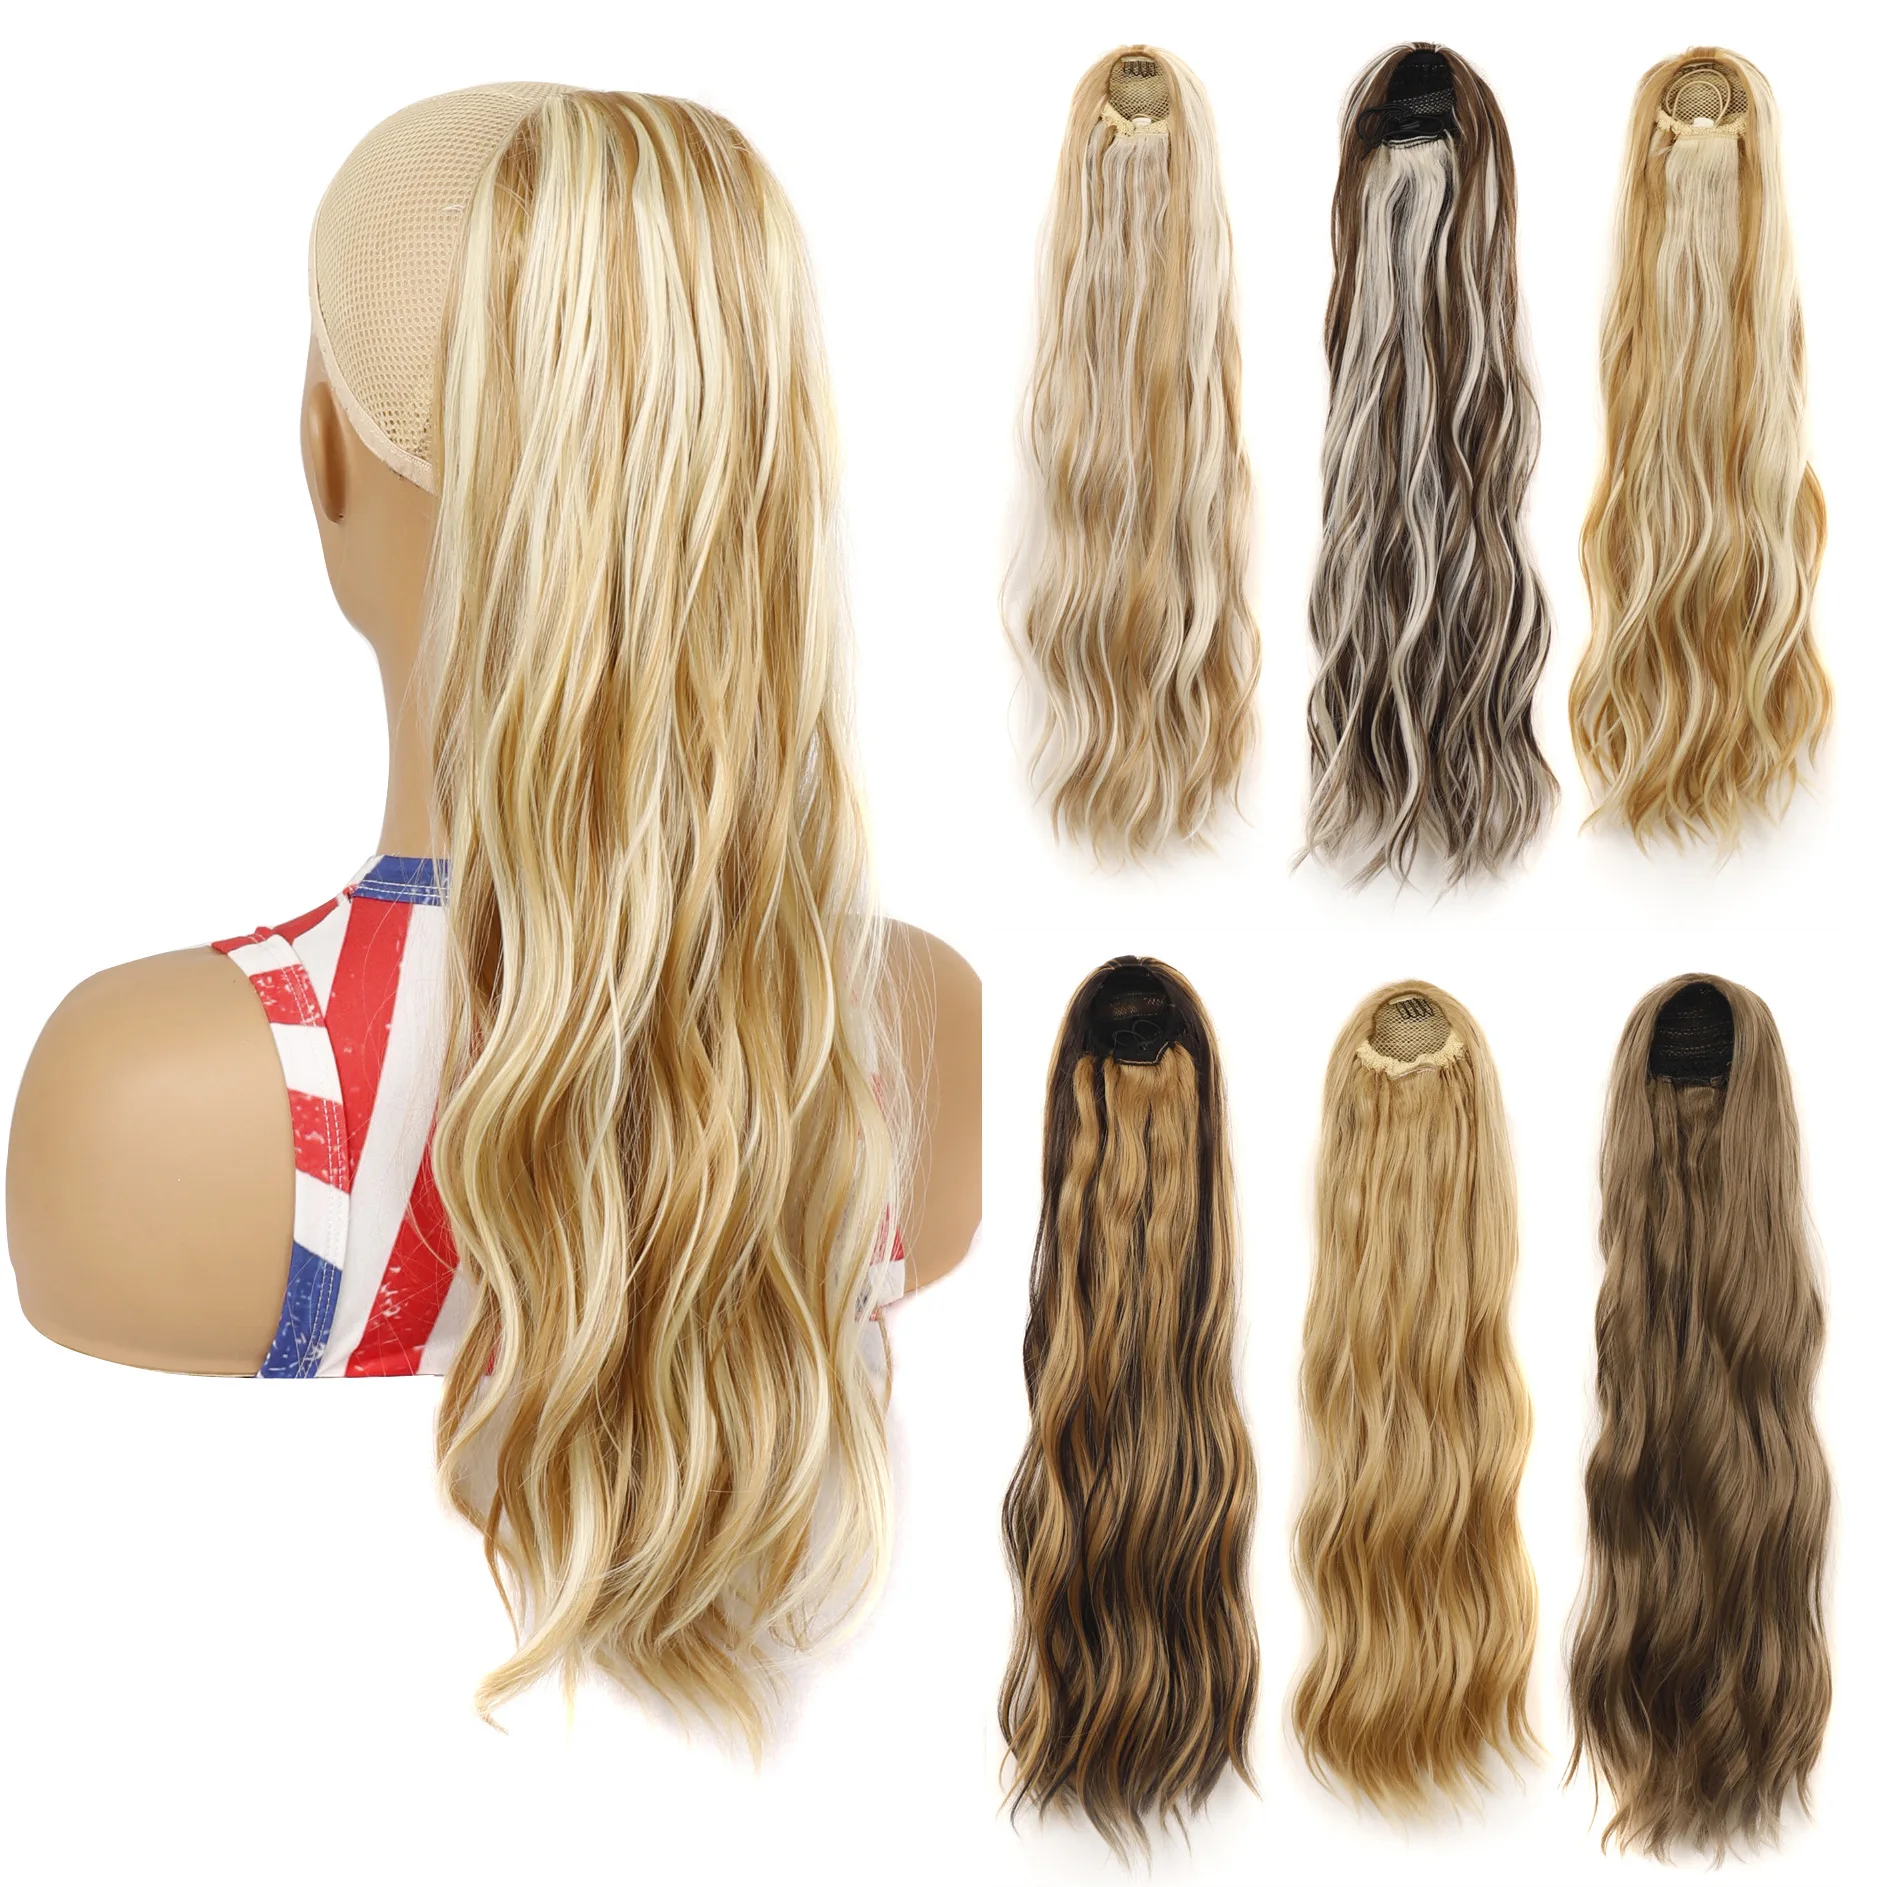 

Drawstring Net Synthetic Ombre Curly Hair Ponytail Extensions Claw in Fake Pony tail Tail Hairpiece Long Clip in Blonde Wavy Wig